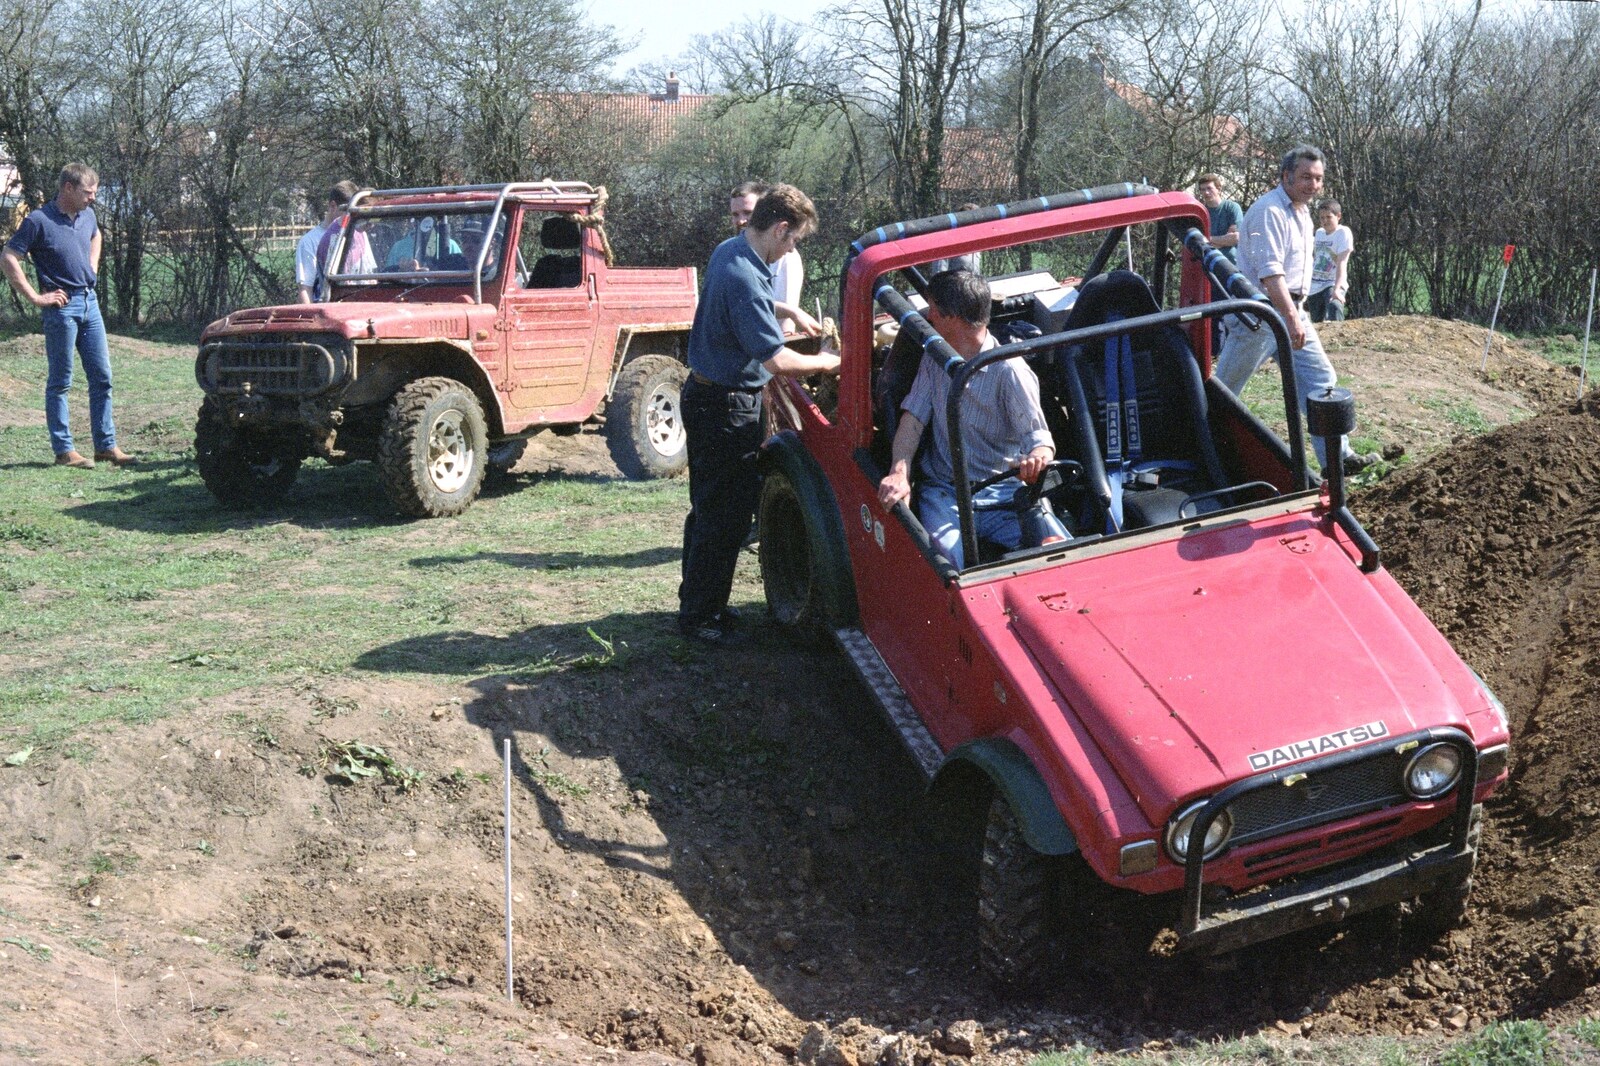 Geoff gets the Daihatsu stuck from Lunch and Dinner at Mad Sue's, Stuston, Suffolk - 30th March 1995